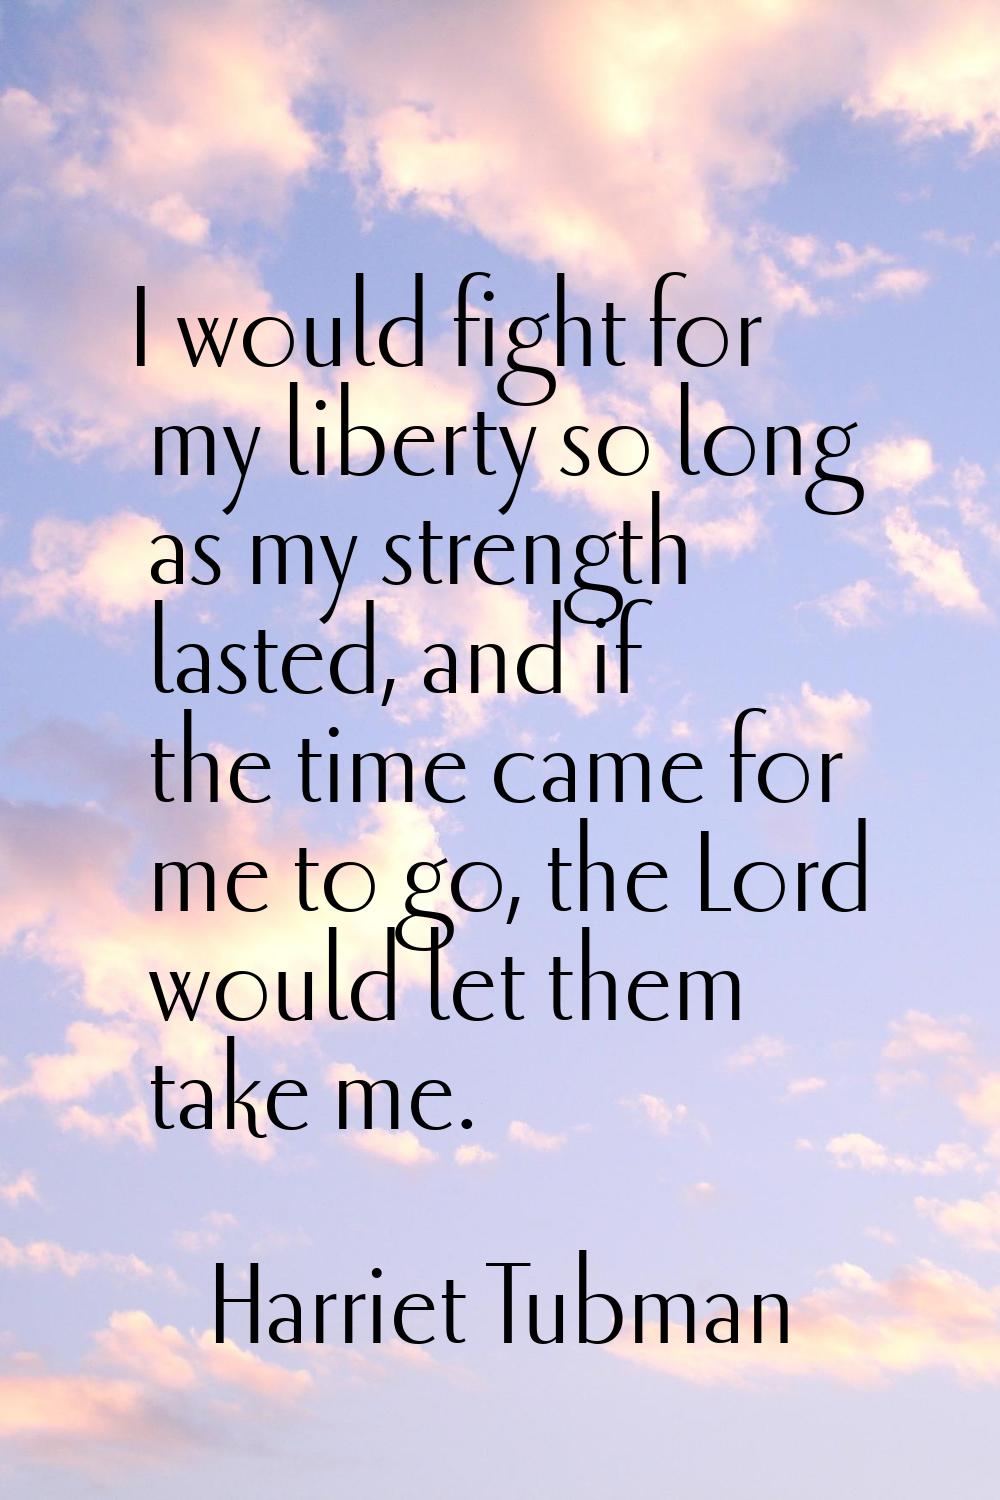 I would fight for my liberty so long as my strength lasted, and if the time came for me to go, the 